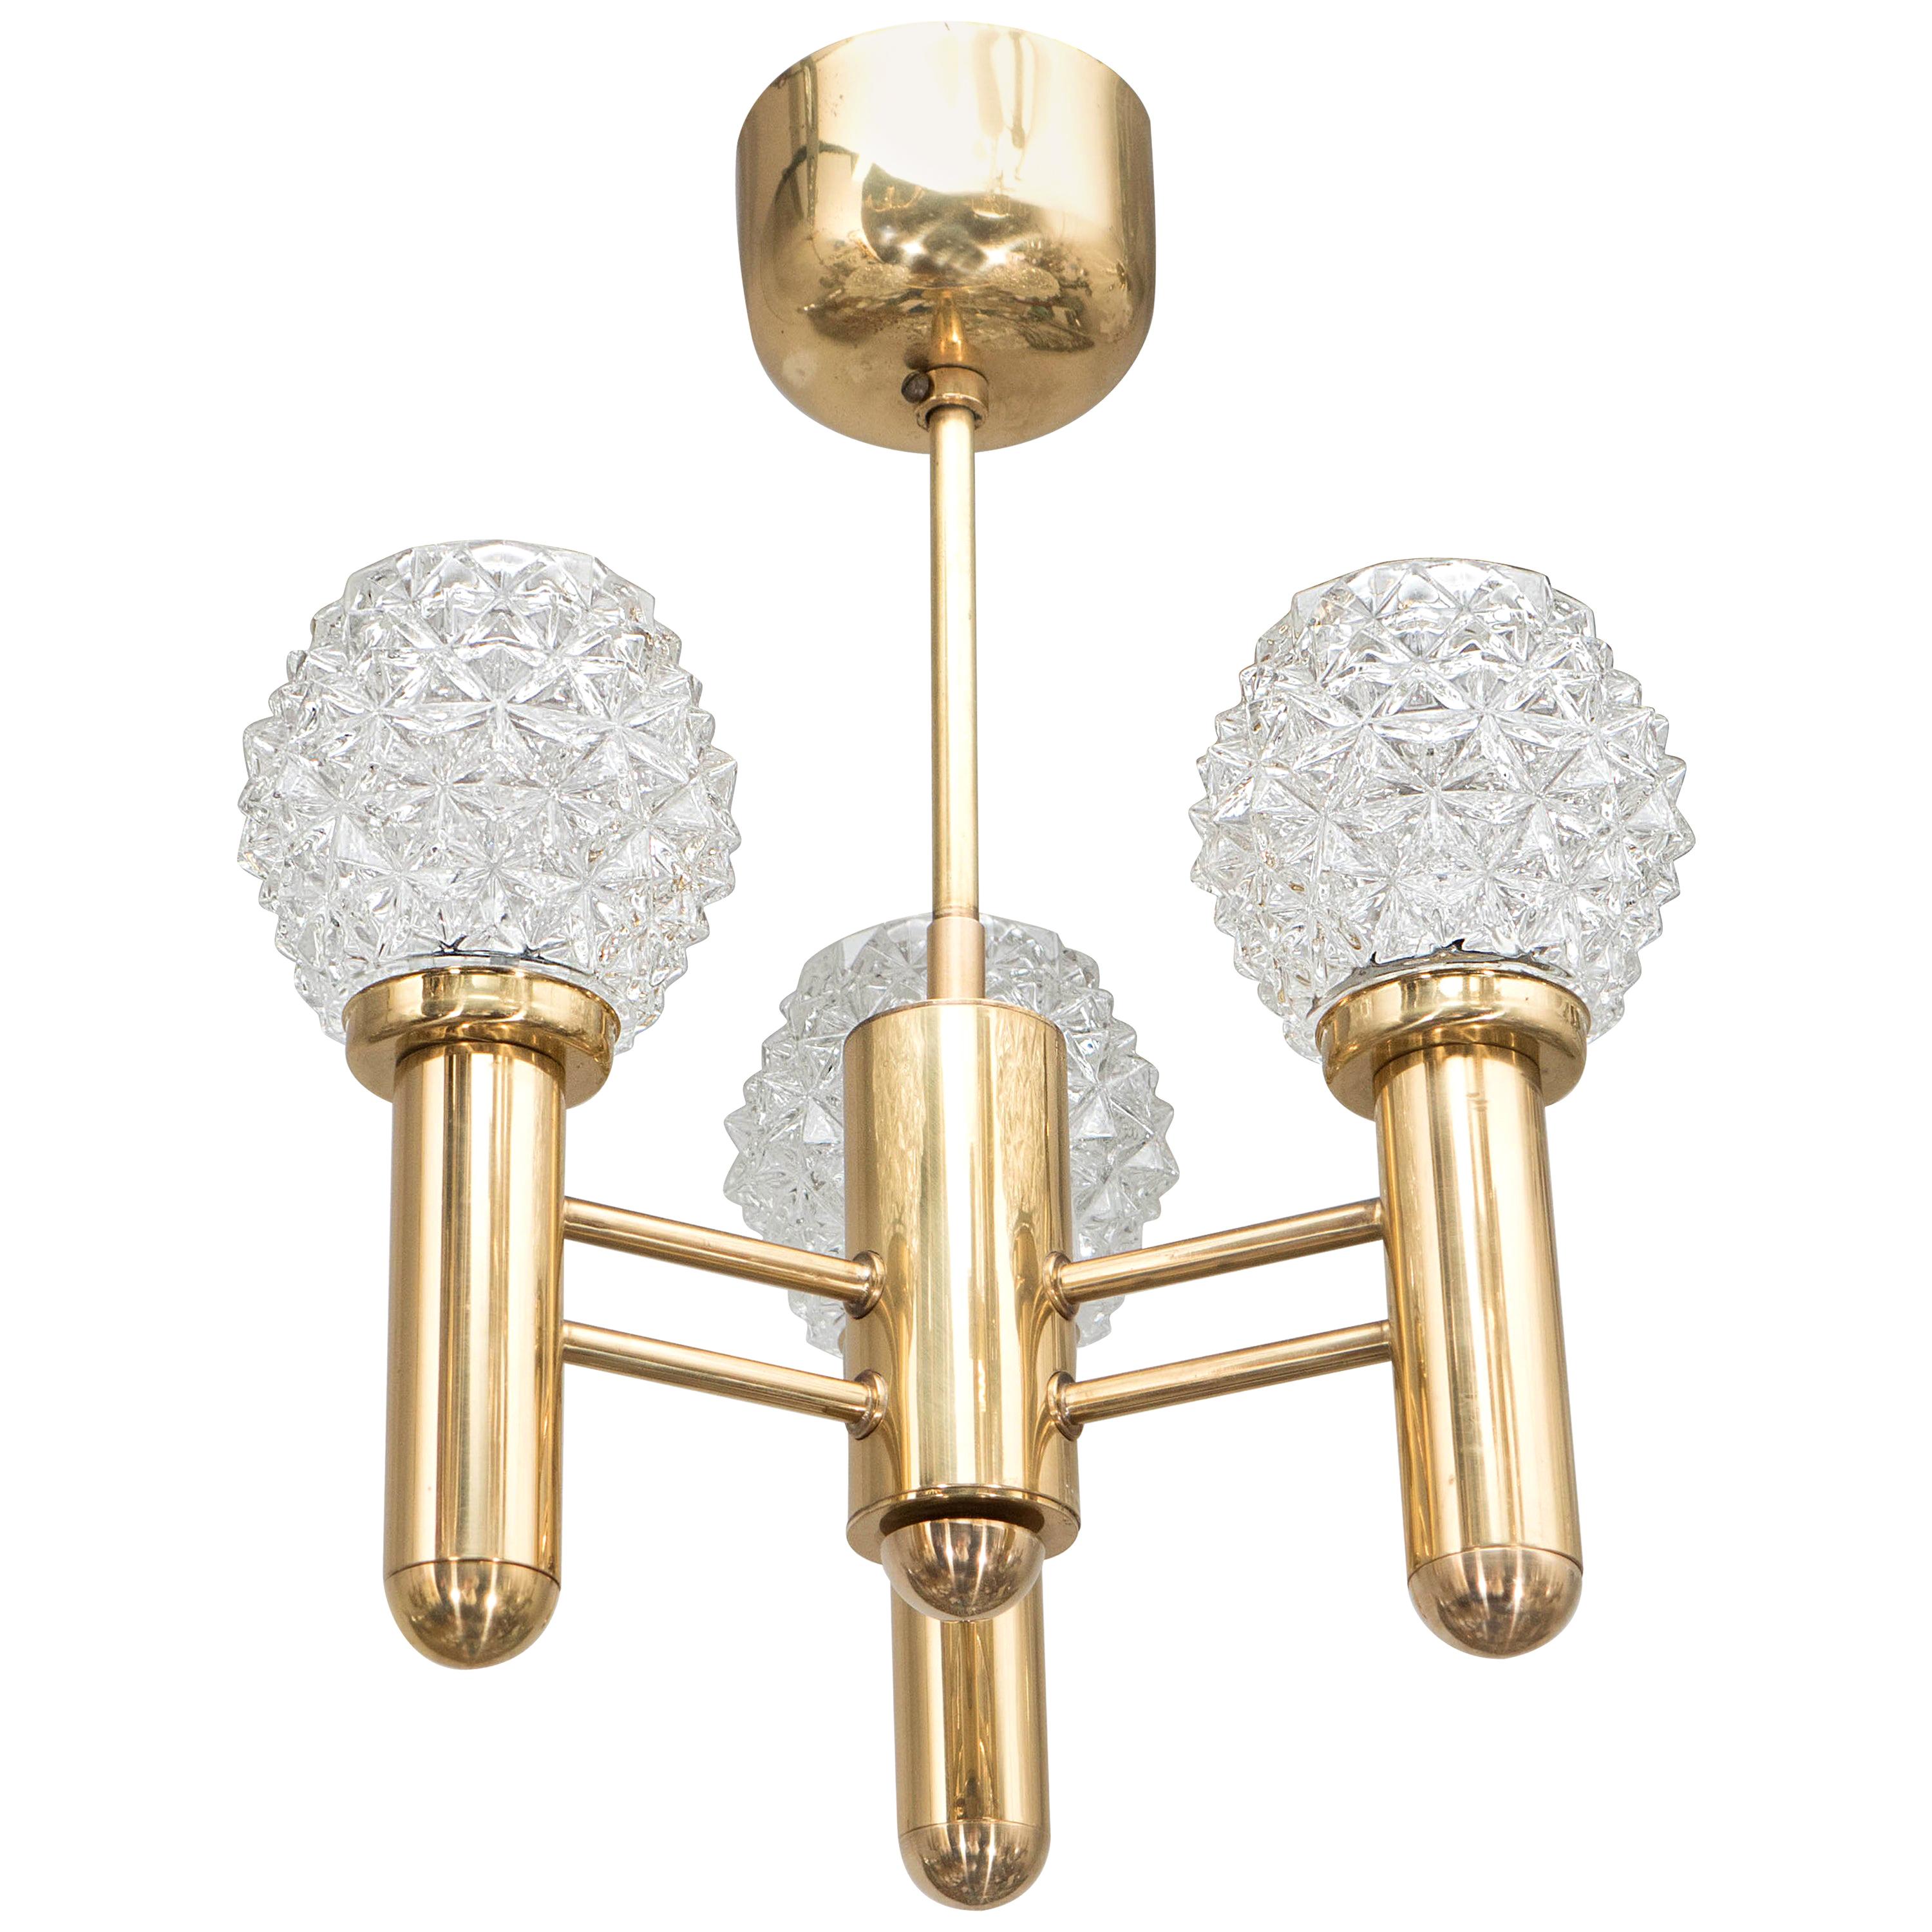 Chic Mid-Century Modern Three-Arm Brass Chandelier with Faceted Glass Globes